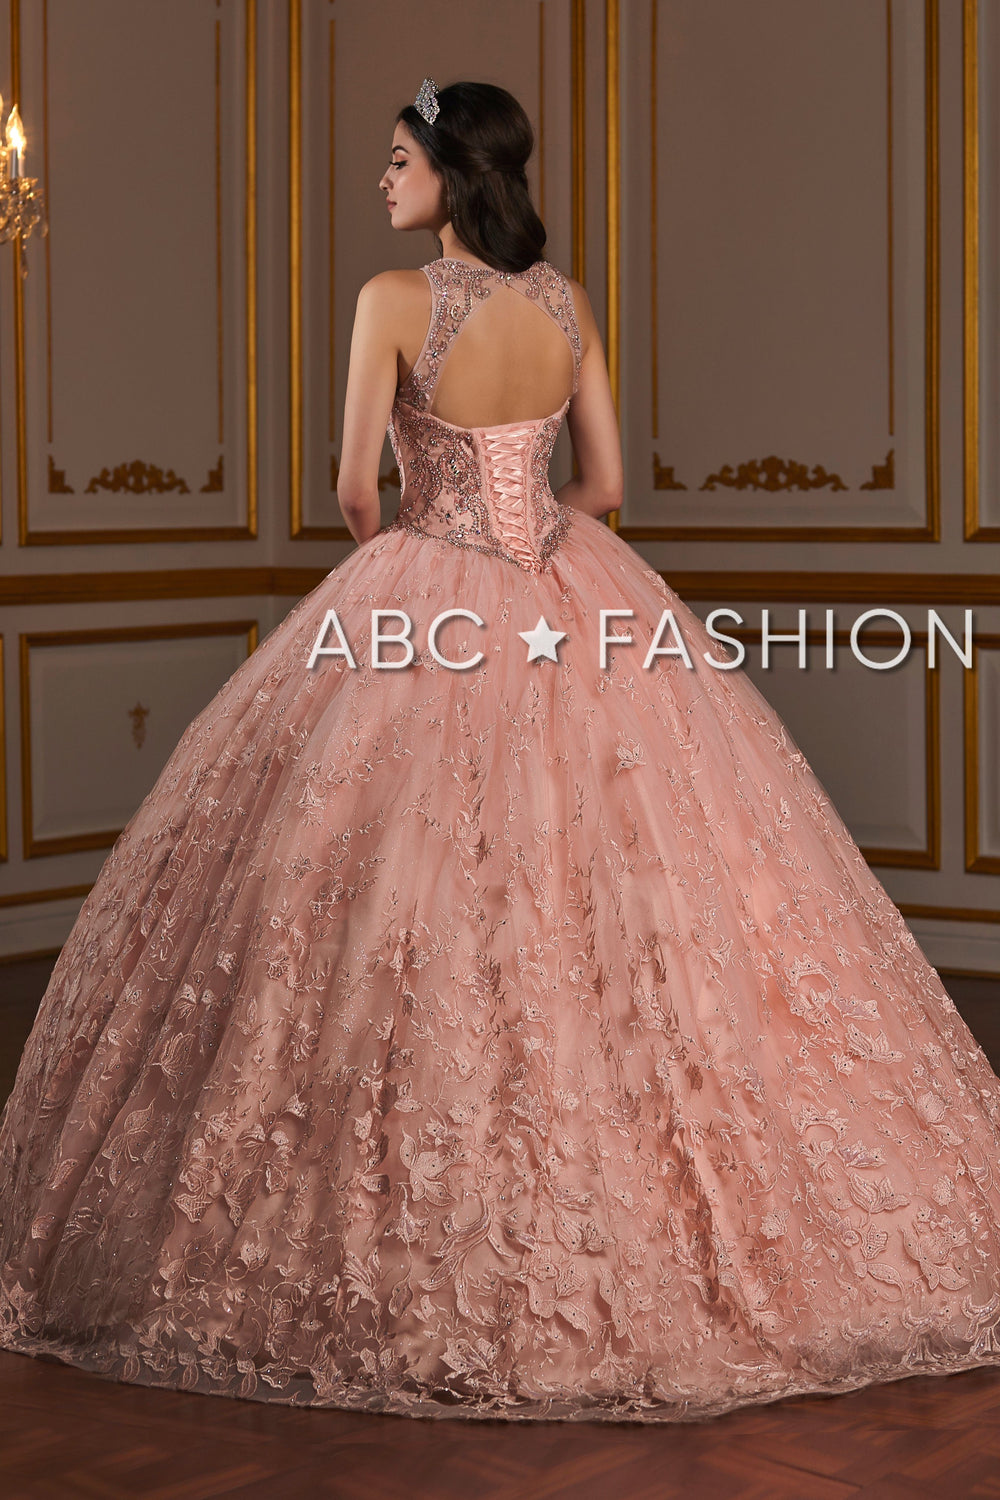 Floral Applique Illusion Quinceanera Dress by House of Wu 26935-Quinceanera Dresses-ABC Fashion